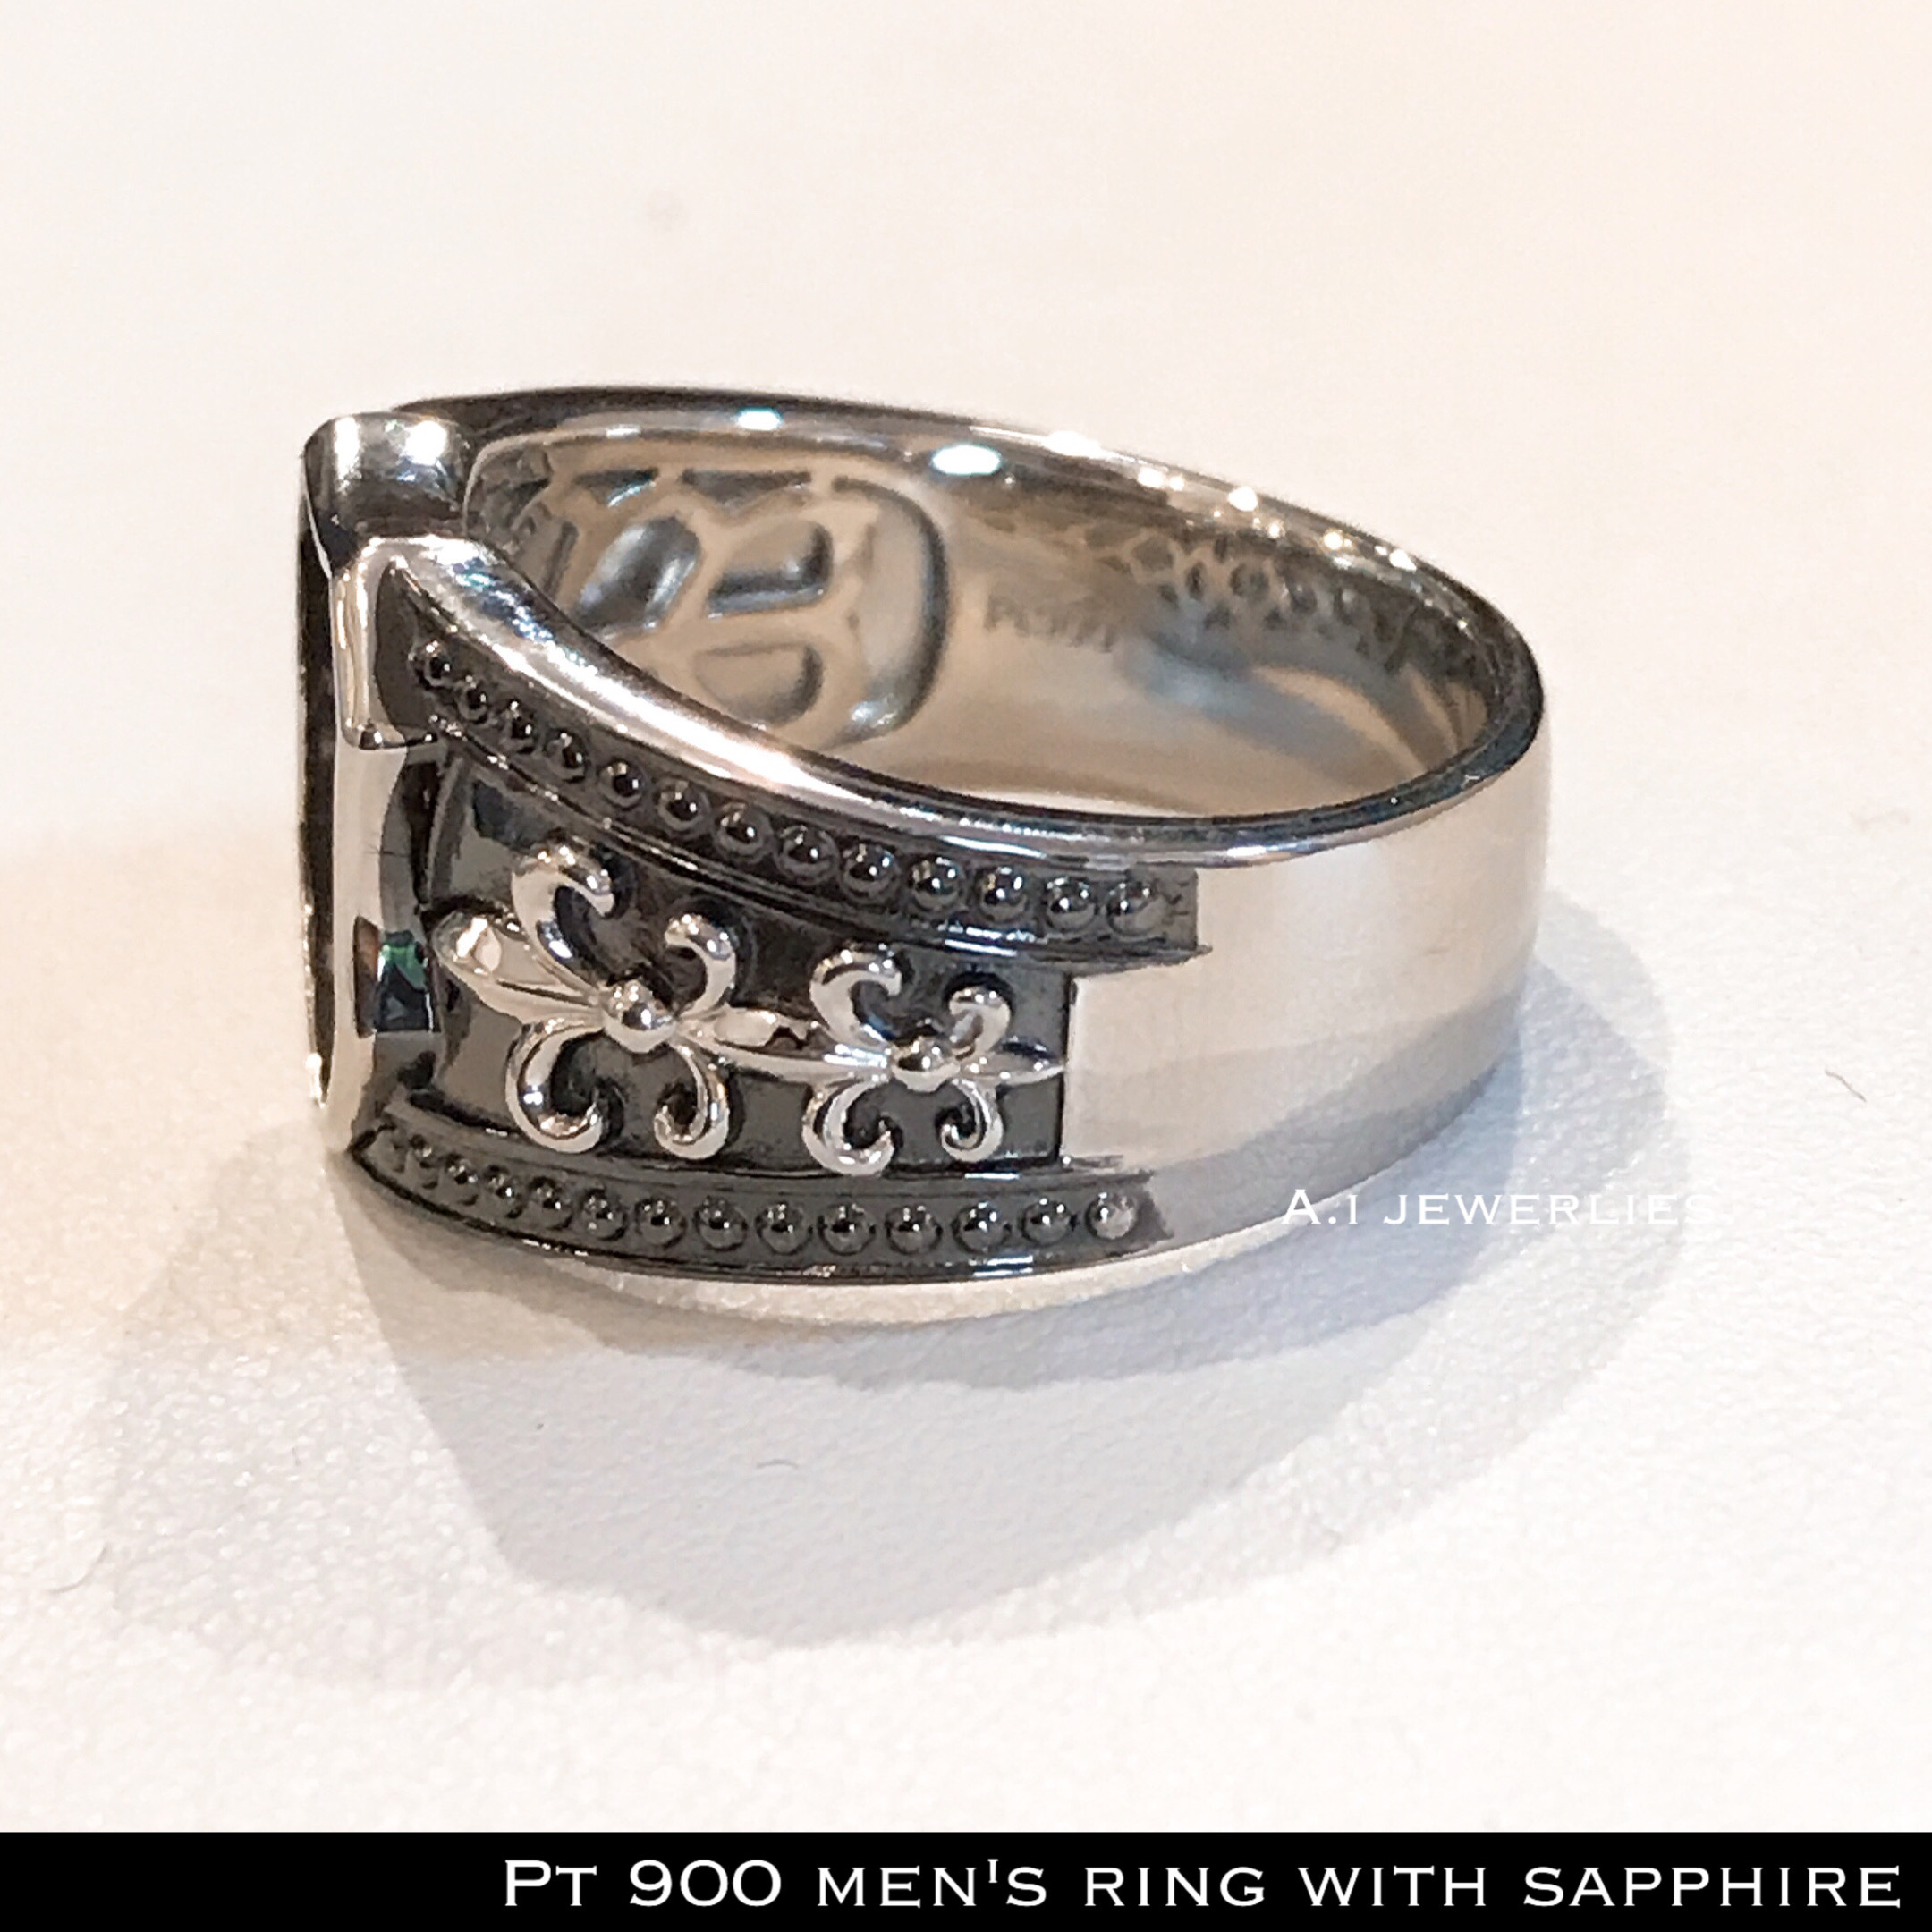 Pt 900 プラチナ メンズ リング 天然サファイヤ 付き Pt 900 Men S Ring With Sapphire A I Jewelries エイアイジュエリーズ